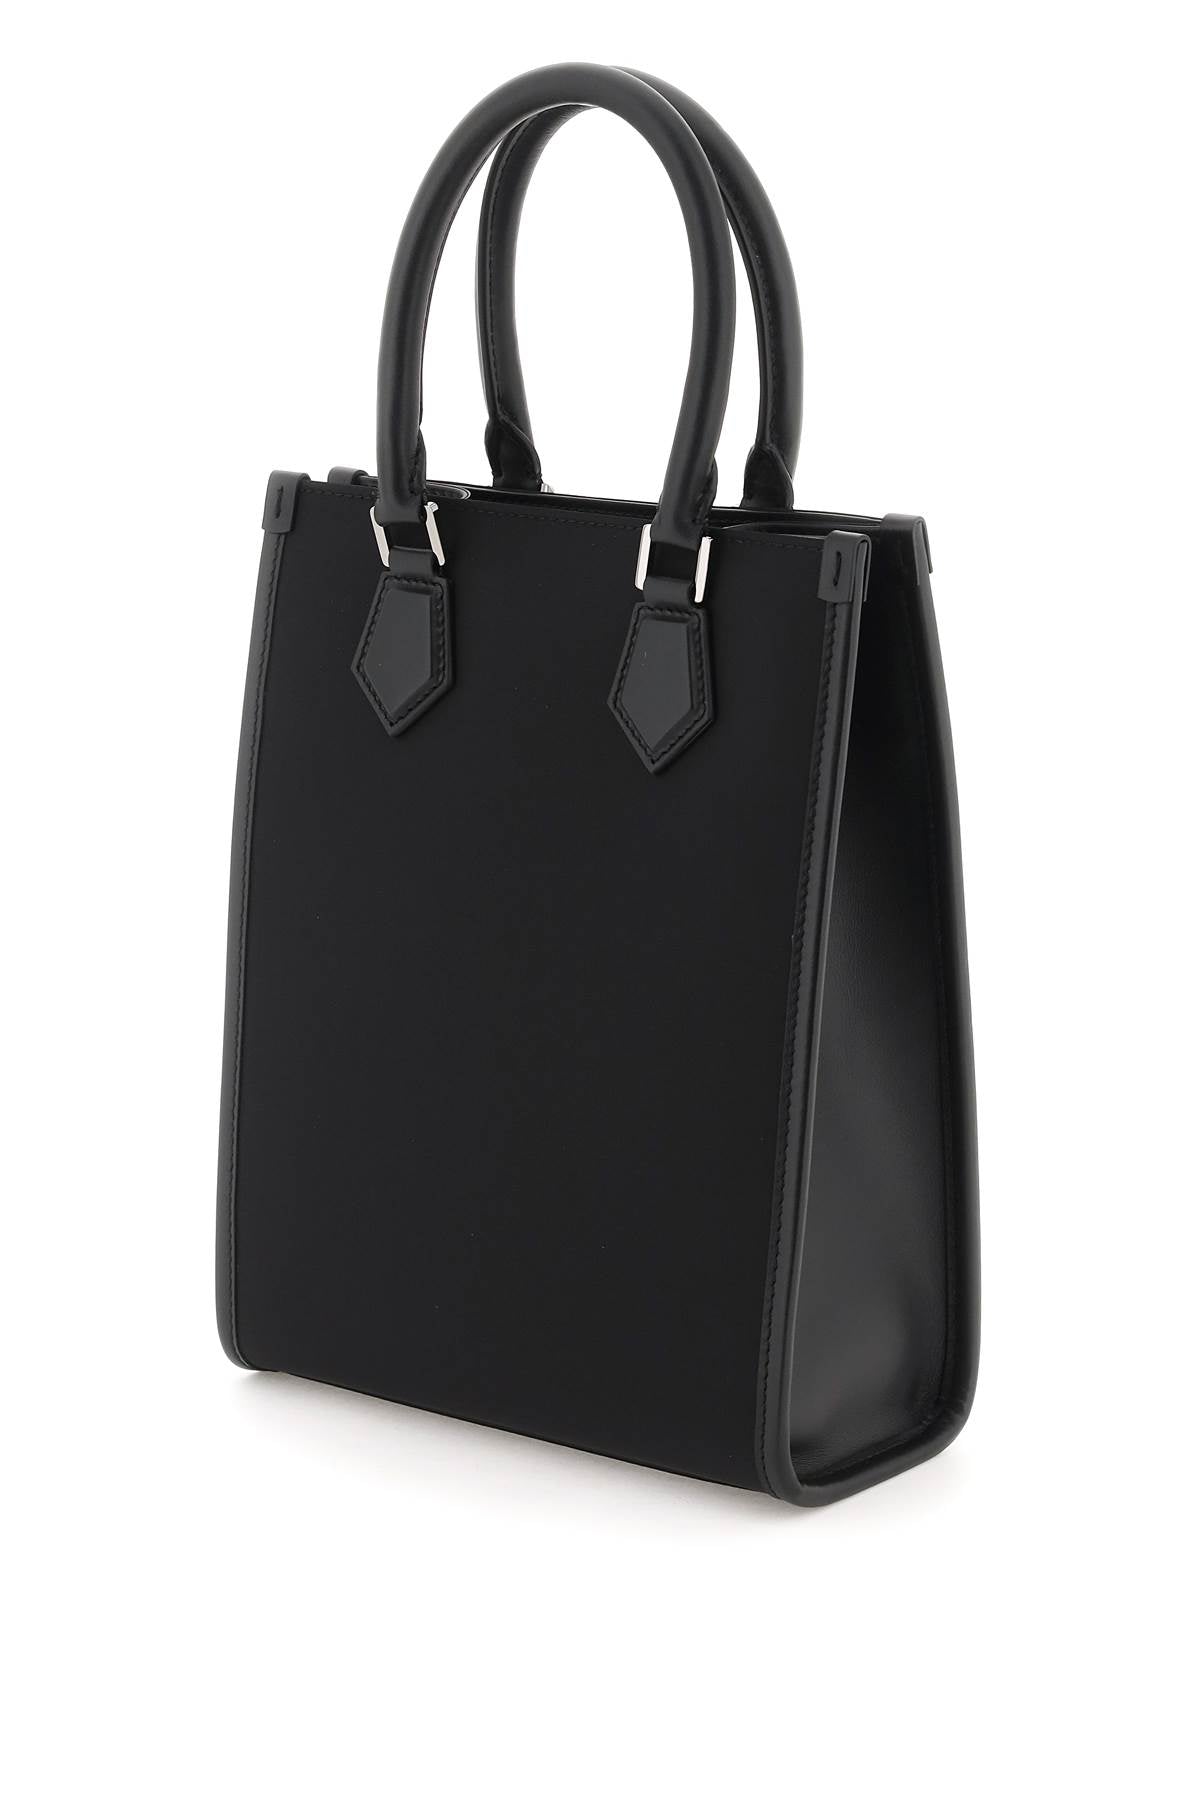 Louis Vuitton Nylon Tote Bags for Women, Authenticity Guaranteed